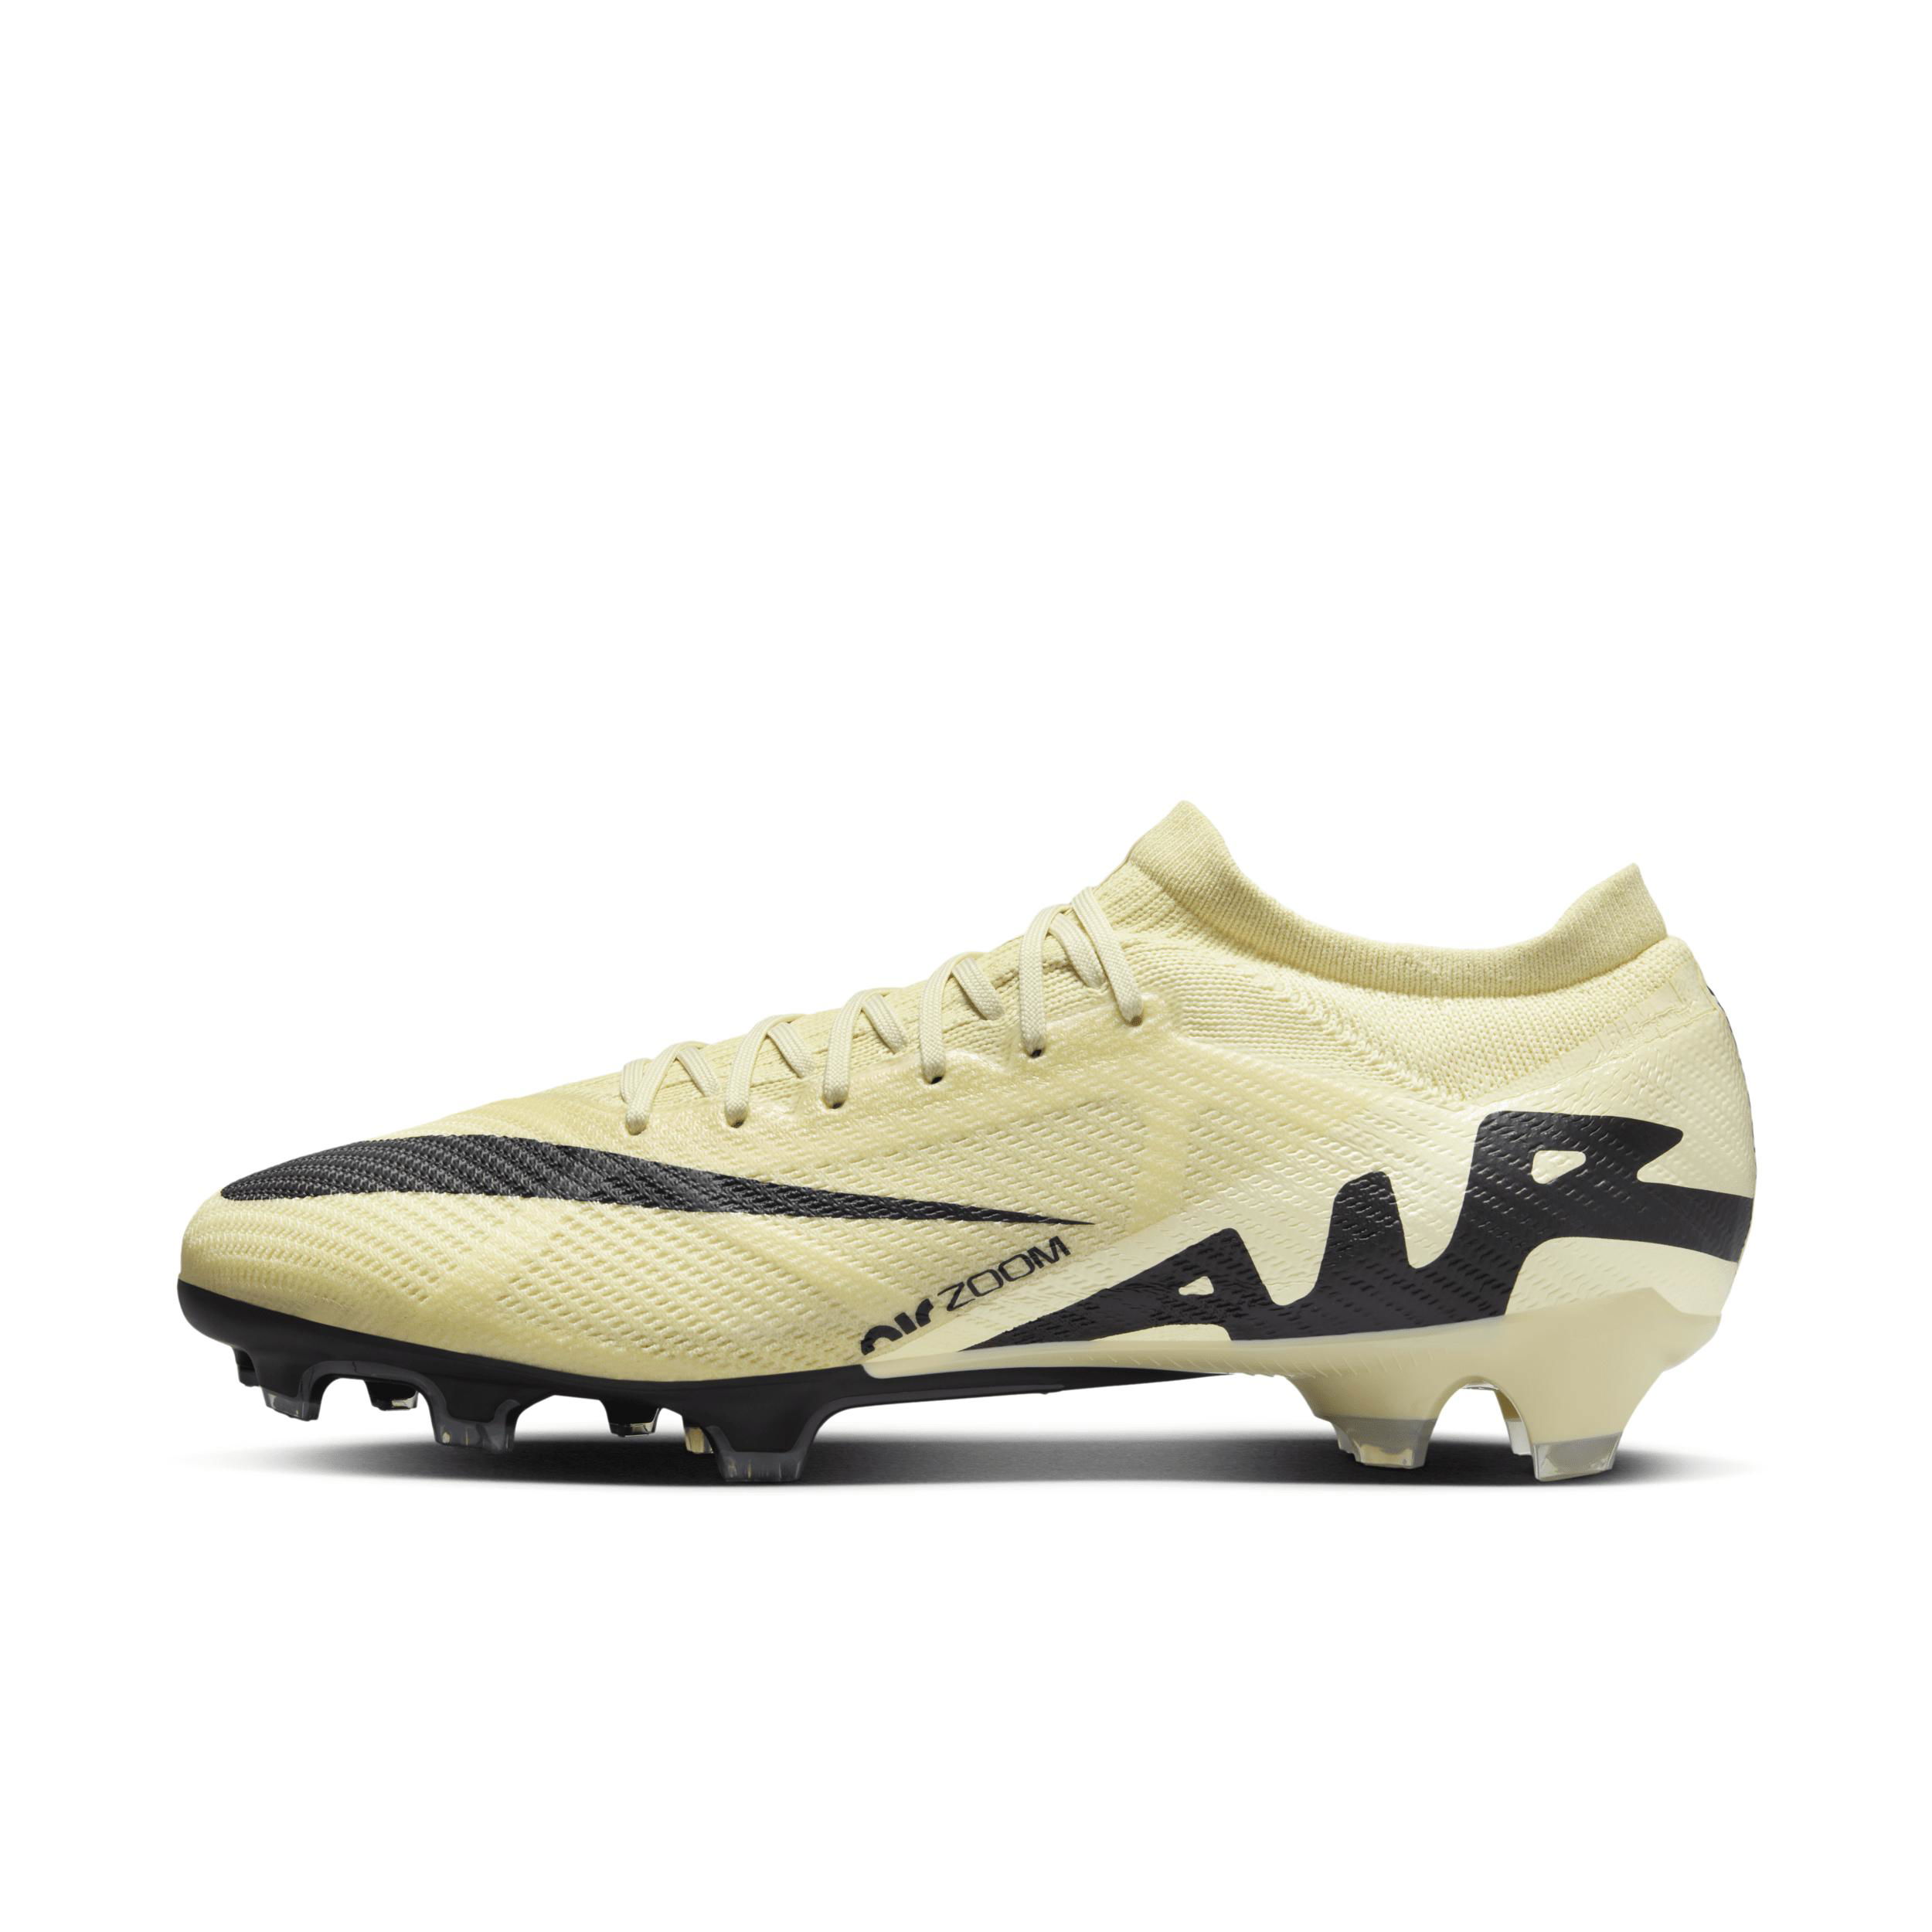 Nike Men's Mercurial Vapor 15 Pro Firm-Ground Low-Top Soccer Cleats by NIKE